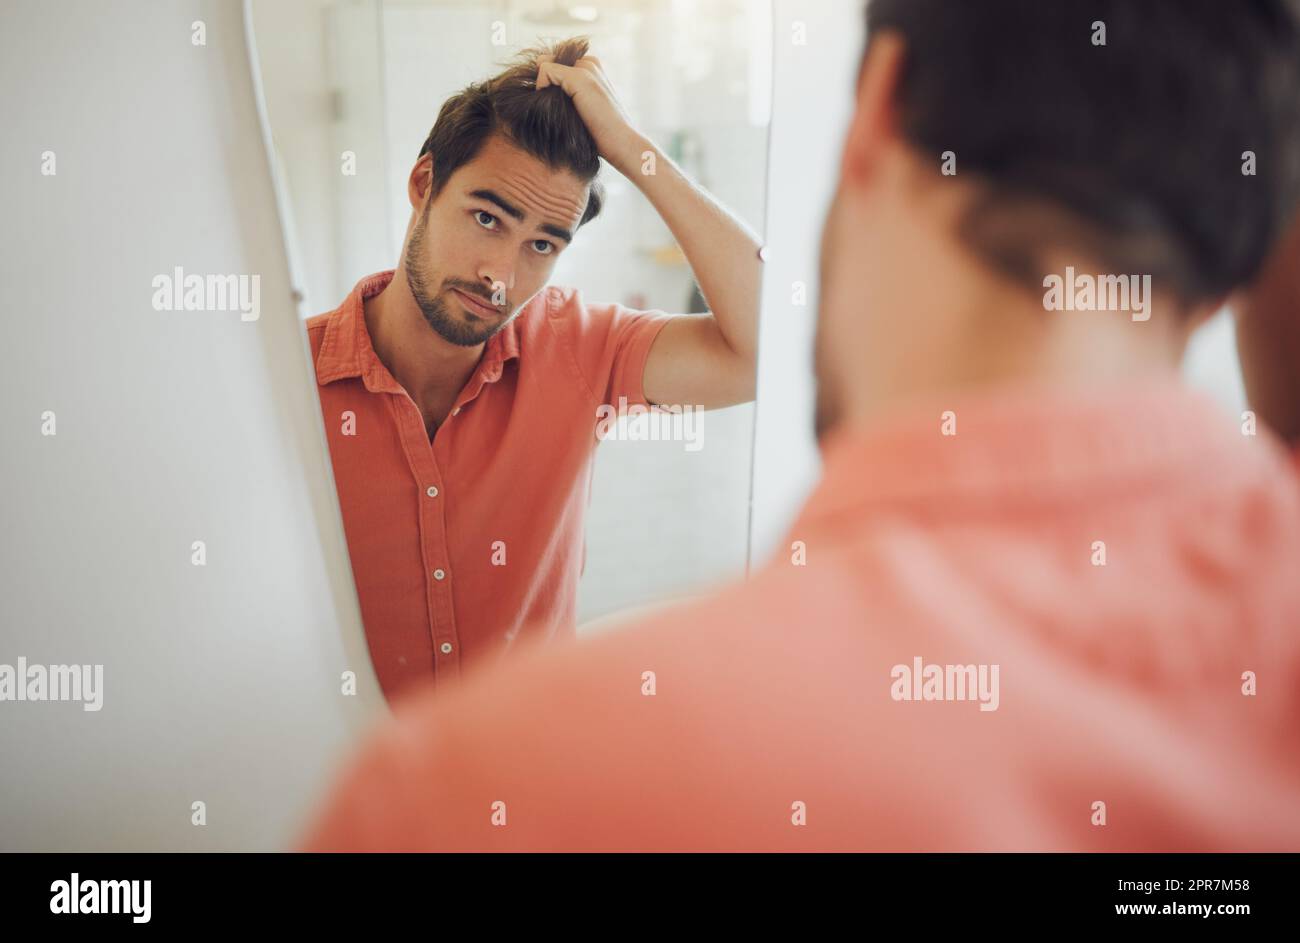 Handsome young caucasian man touching his hair and looking in the bathroom mirror. Male pulling his hair and thinking of getting a haircut. Concerned man worried about dandruff, receding hairline or hair loss Stock Photo